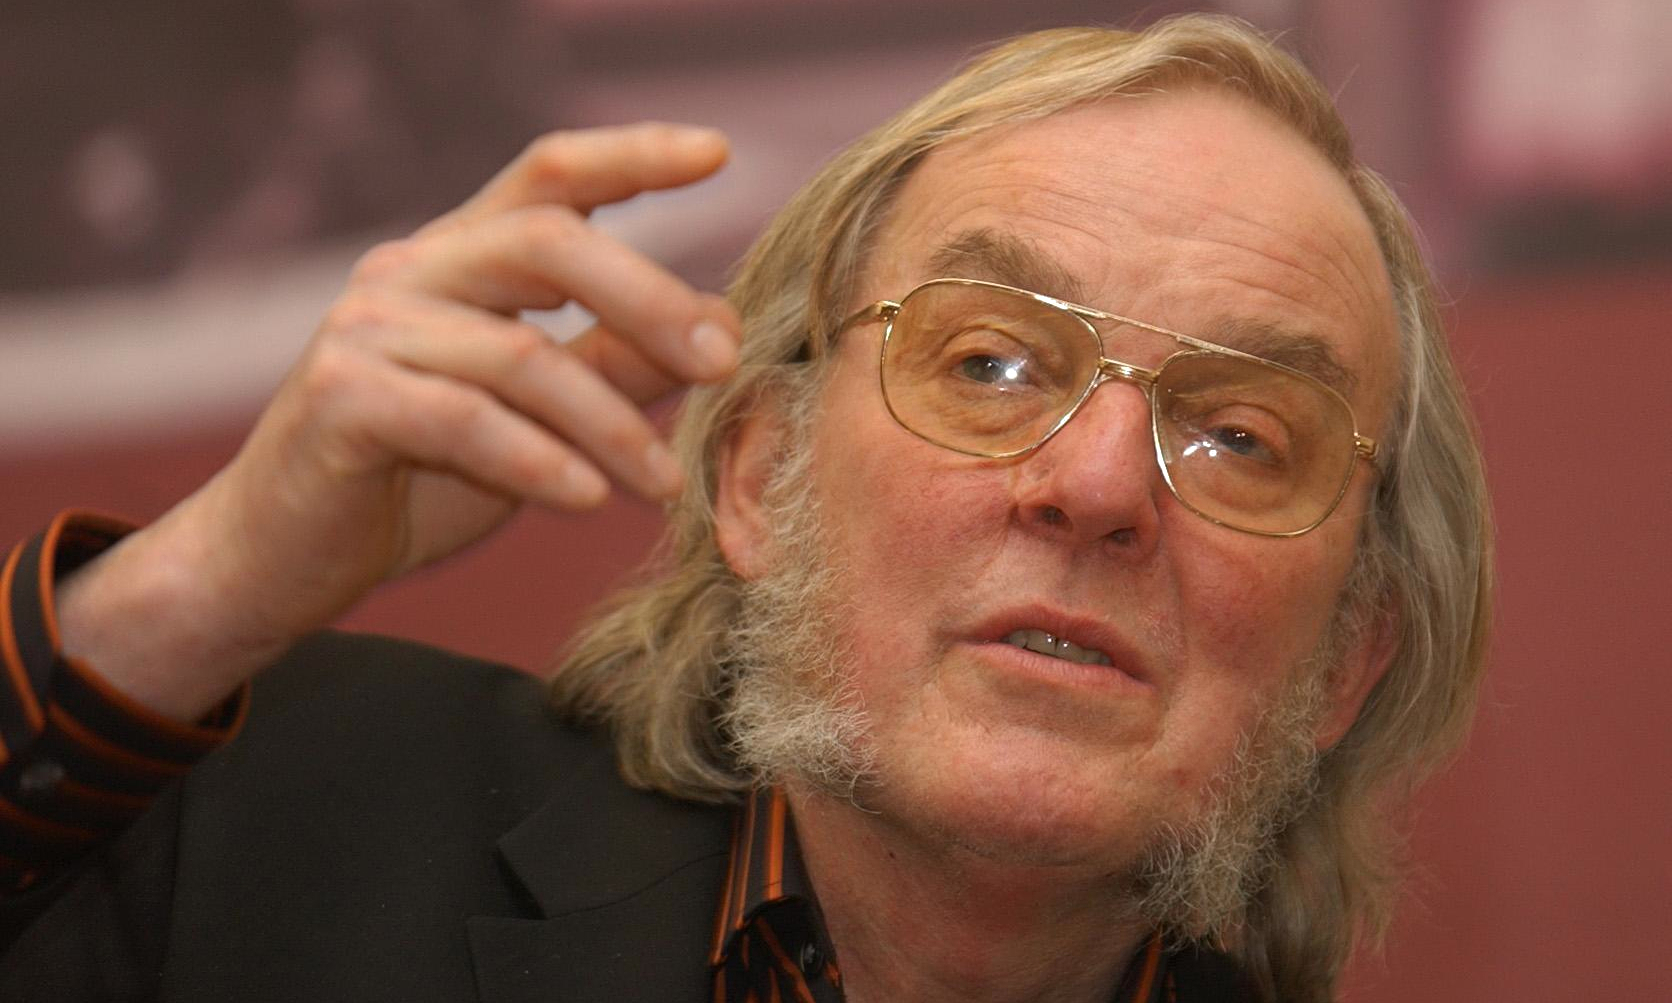 Beagle 2 Scientist Colin Pillinger Dies Aged 70 Science The Guardian 